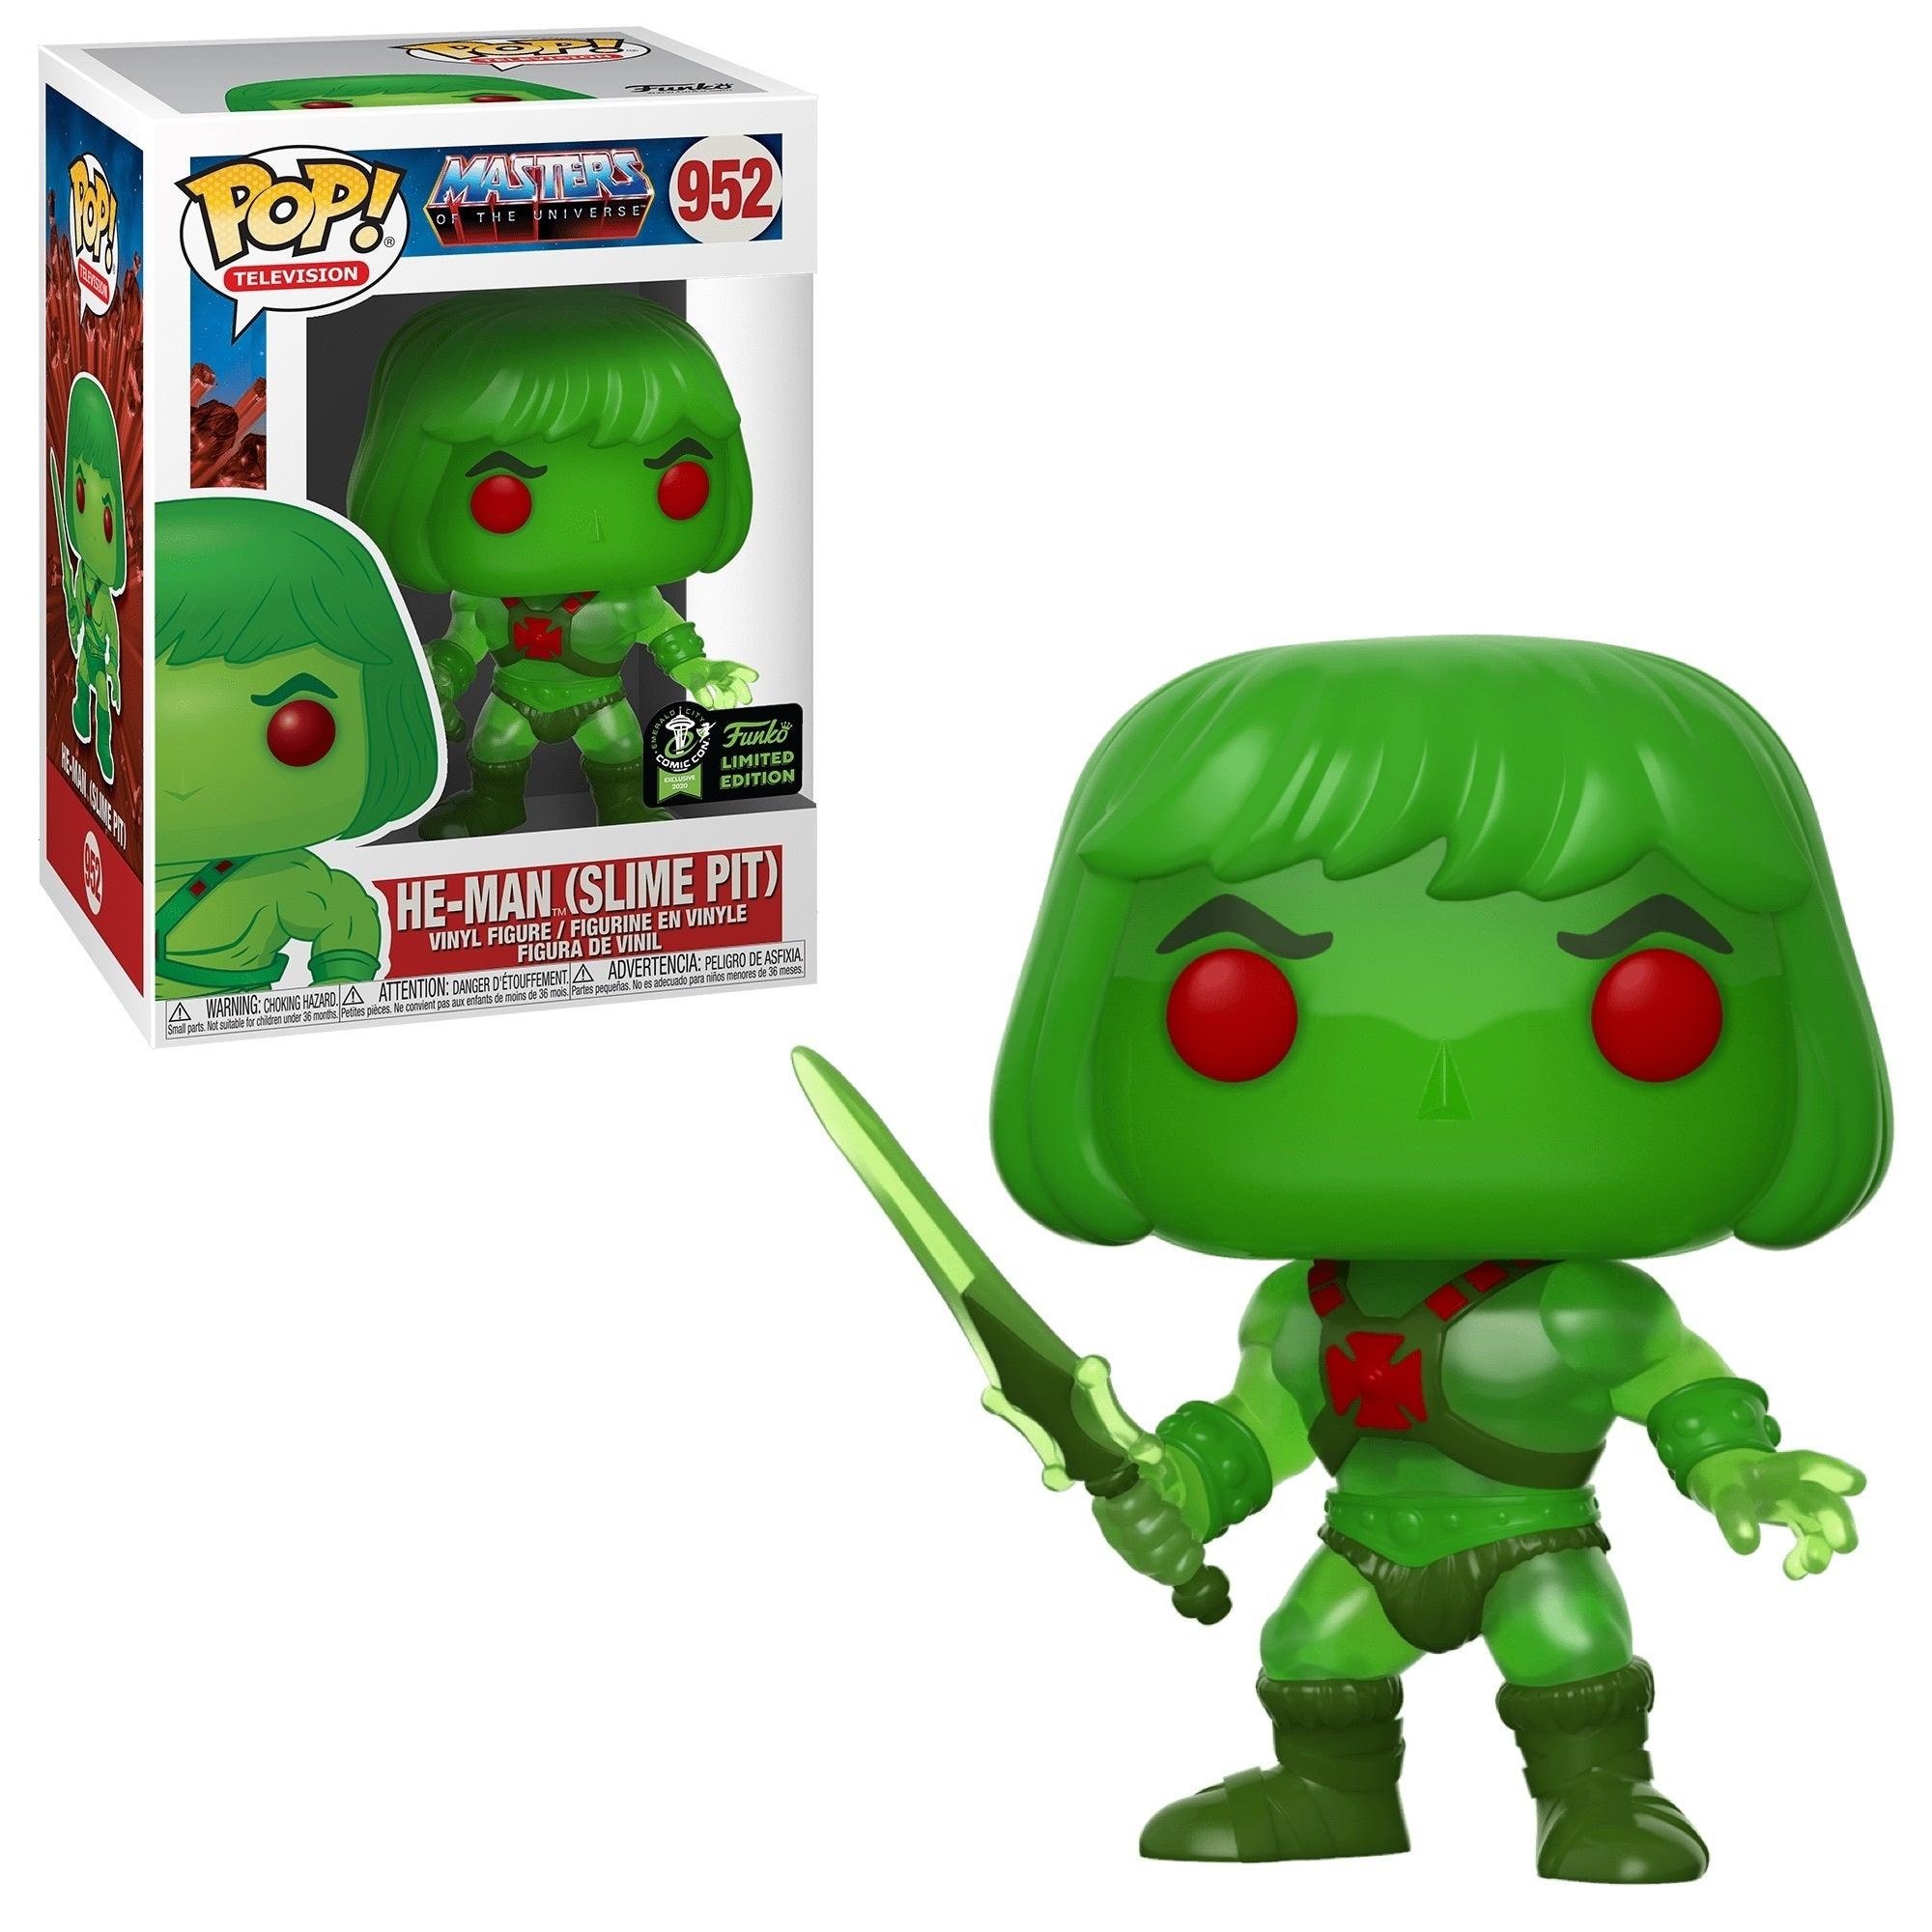 Pop! Television - Master Of The Universe (MOTU) - He-Man (Slime Pit) - #952 - 2020 Emerald City Comic Con EXCLUSIVE - Hobby Champion Inc